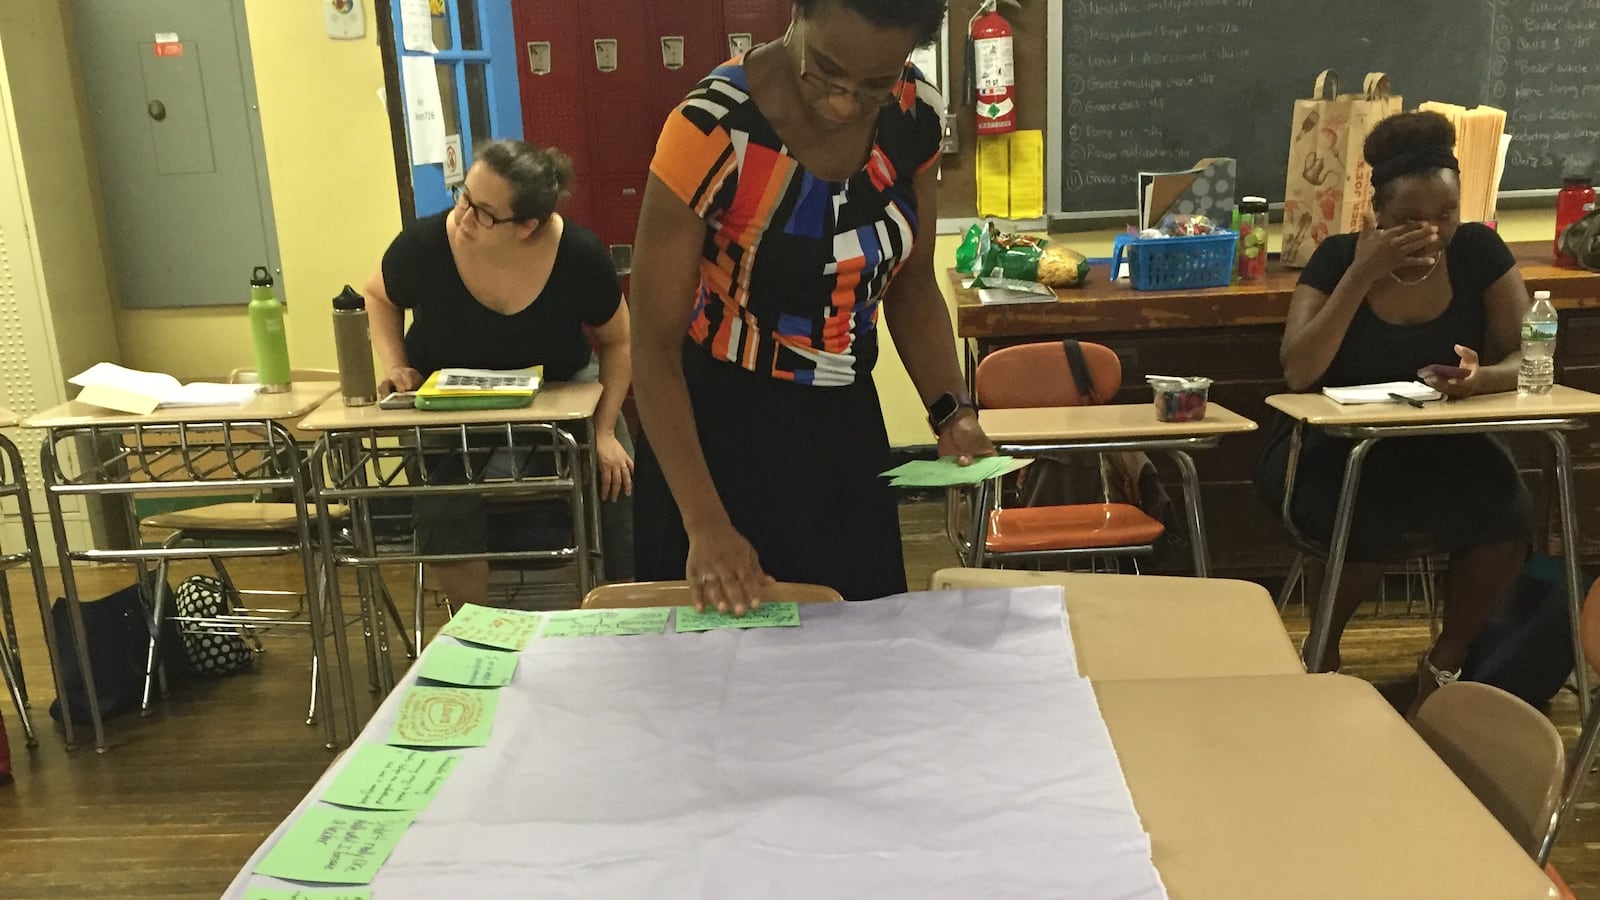 Rajihah Coaxum making a version of the "centerpiece" for teachers participating in the NYC Math Lab.